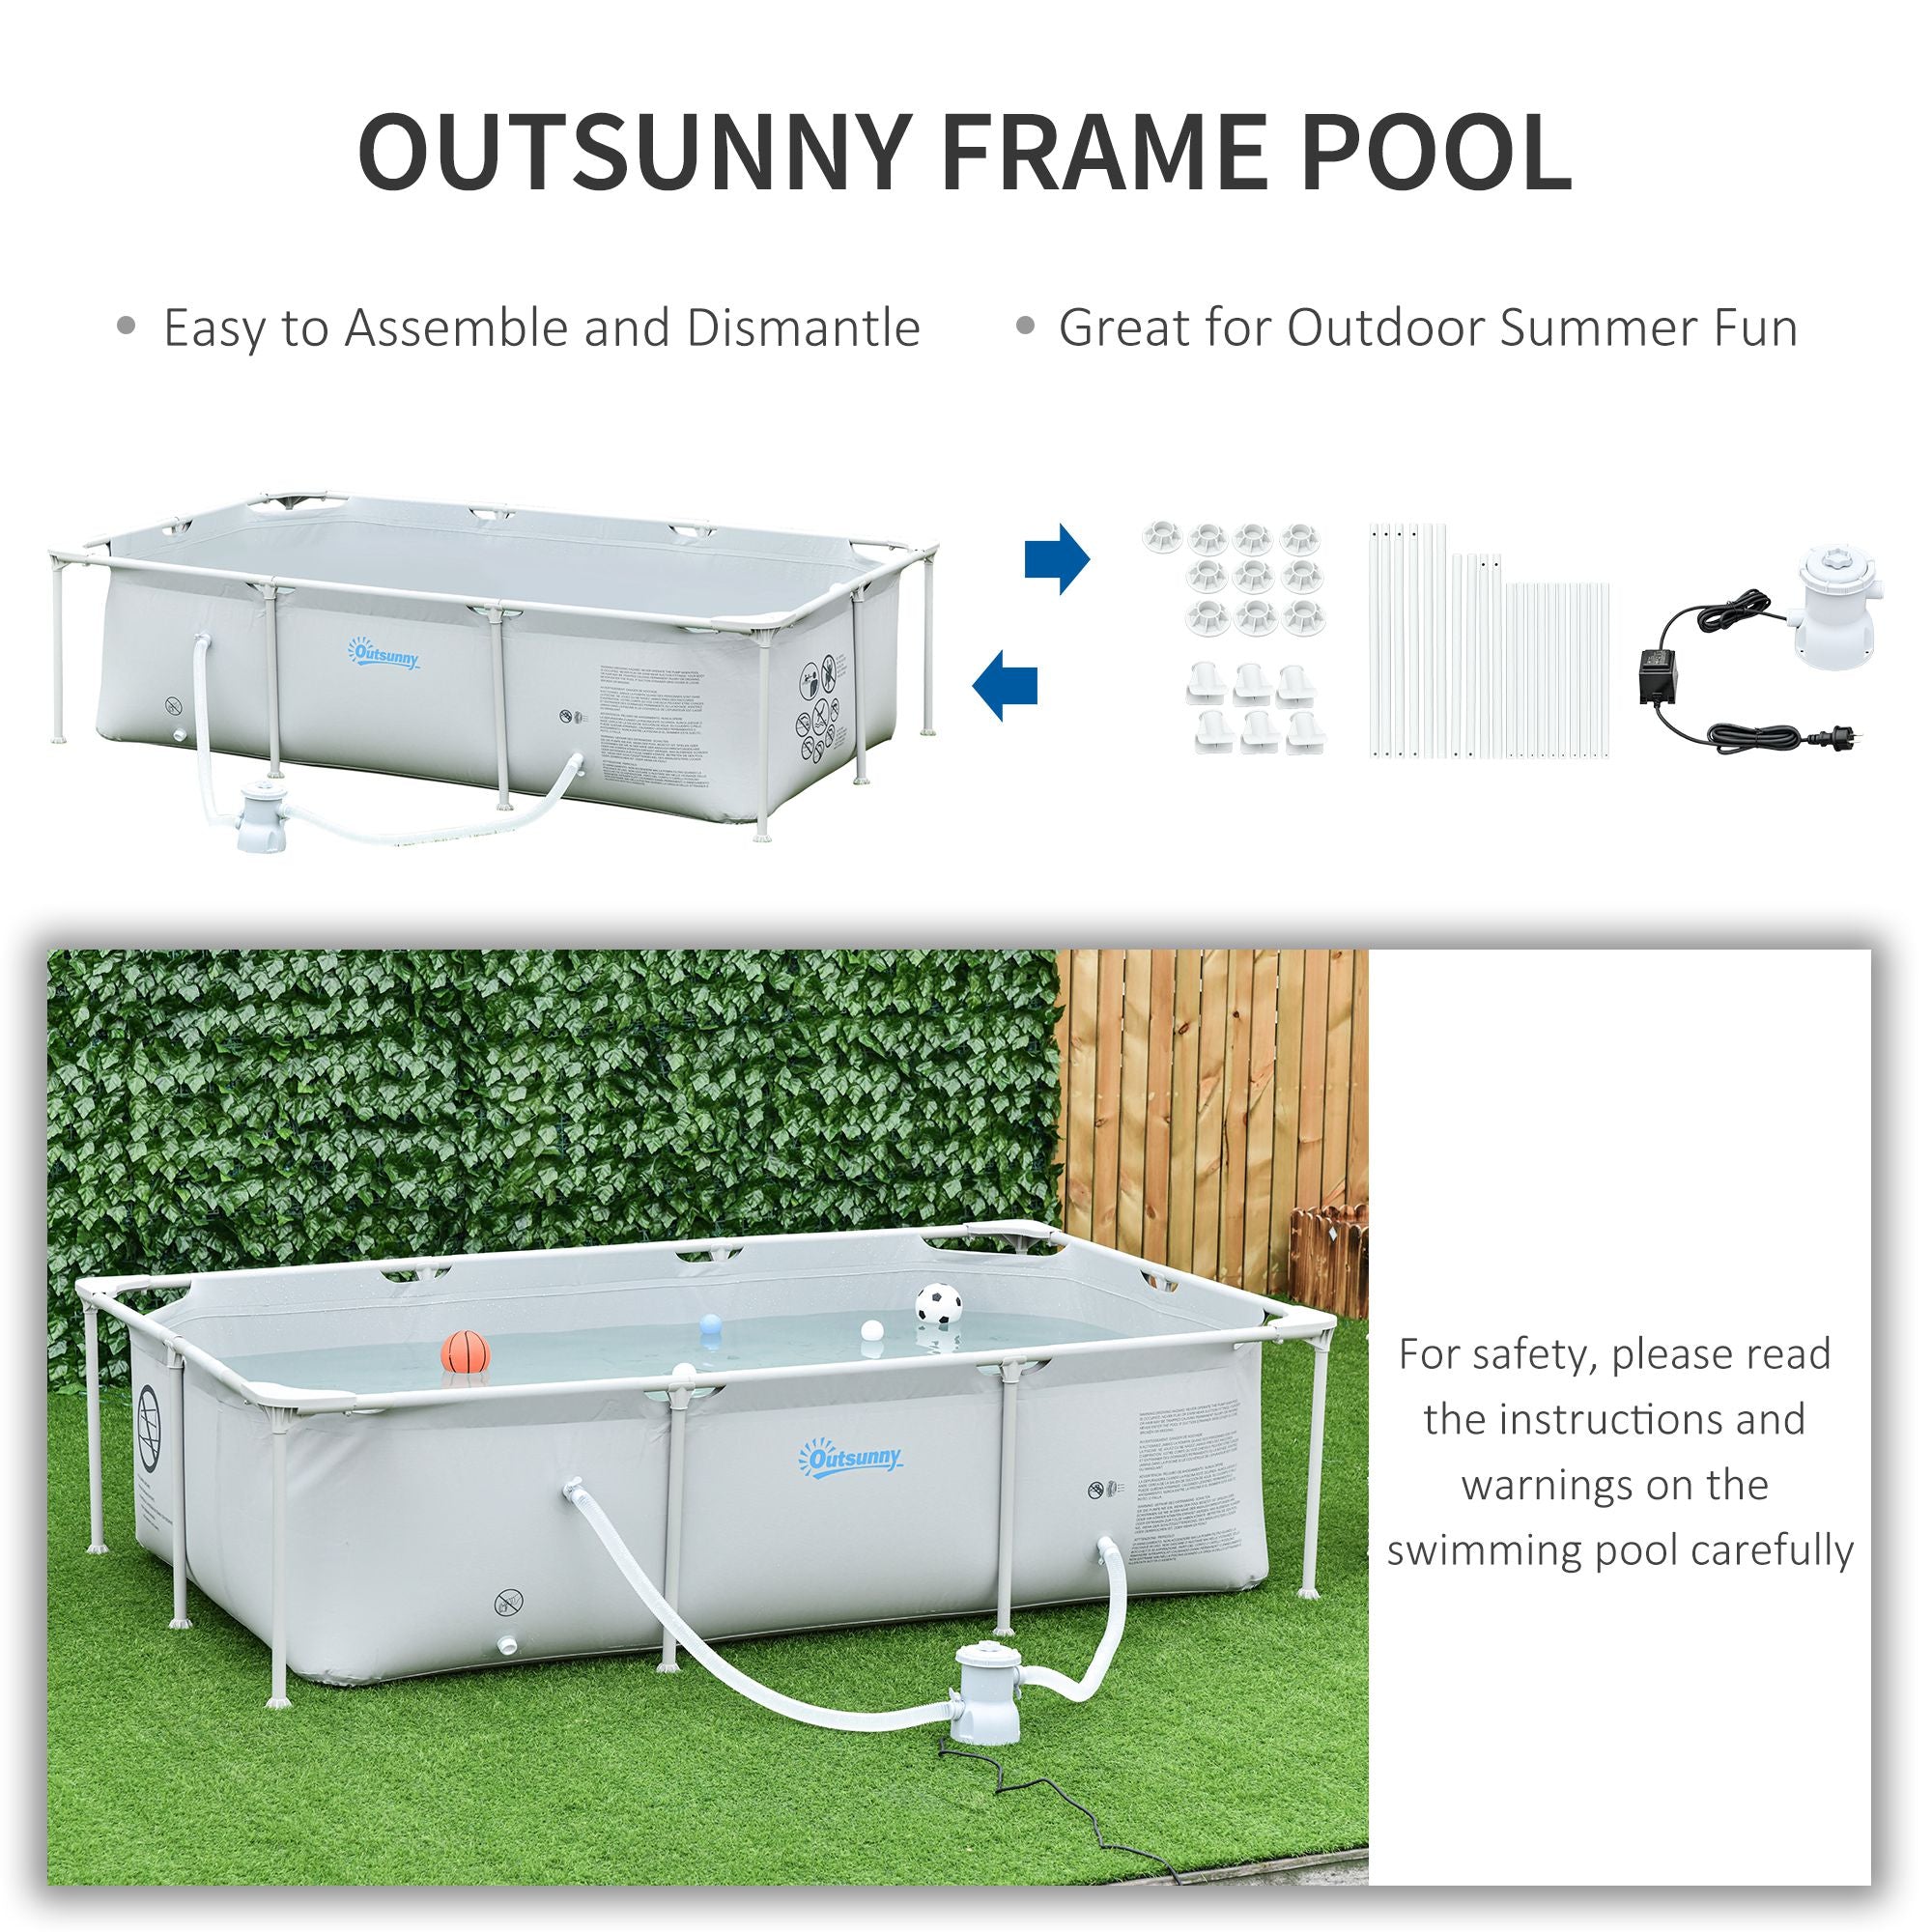 Outsunny Steel Frame Pool with Filter Pump and Filter Cartridge Rust Resistant Above Ground Pool with Reinforced Sidewalls, 252 x 152 x 65cm, Grey - Inspirely